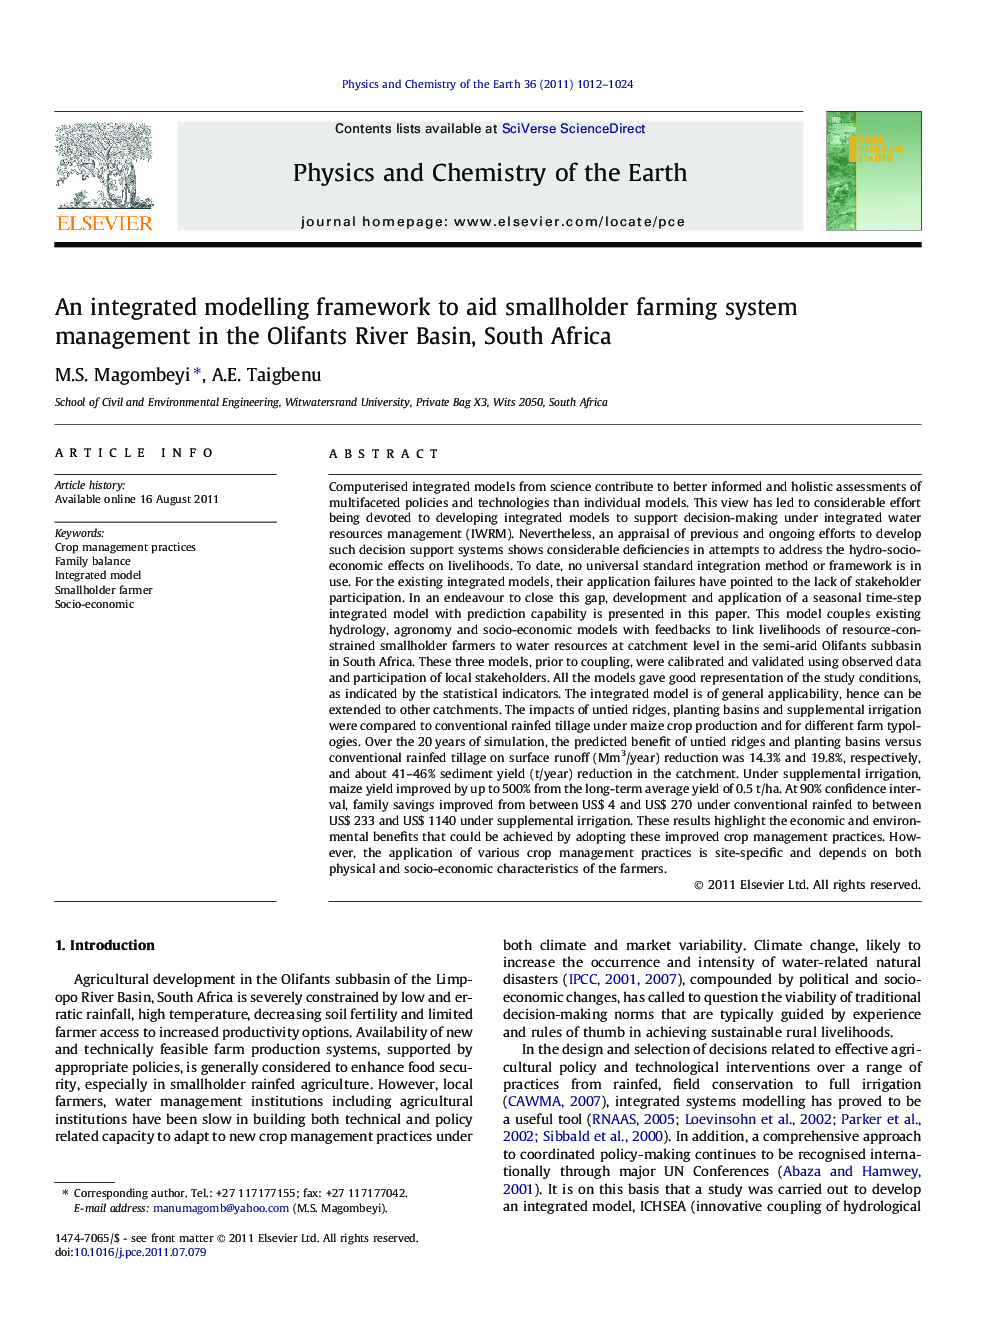 An integrated modelling framework to aid smallholder farming system management in the Olifants River Basin, South Africa